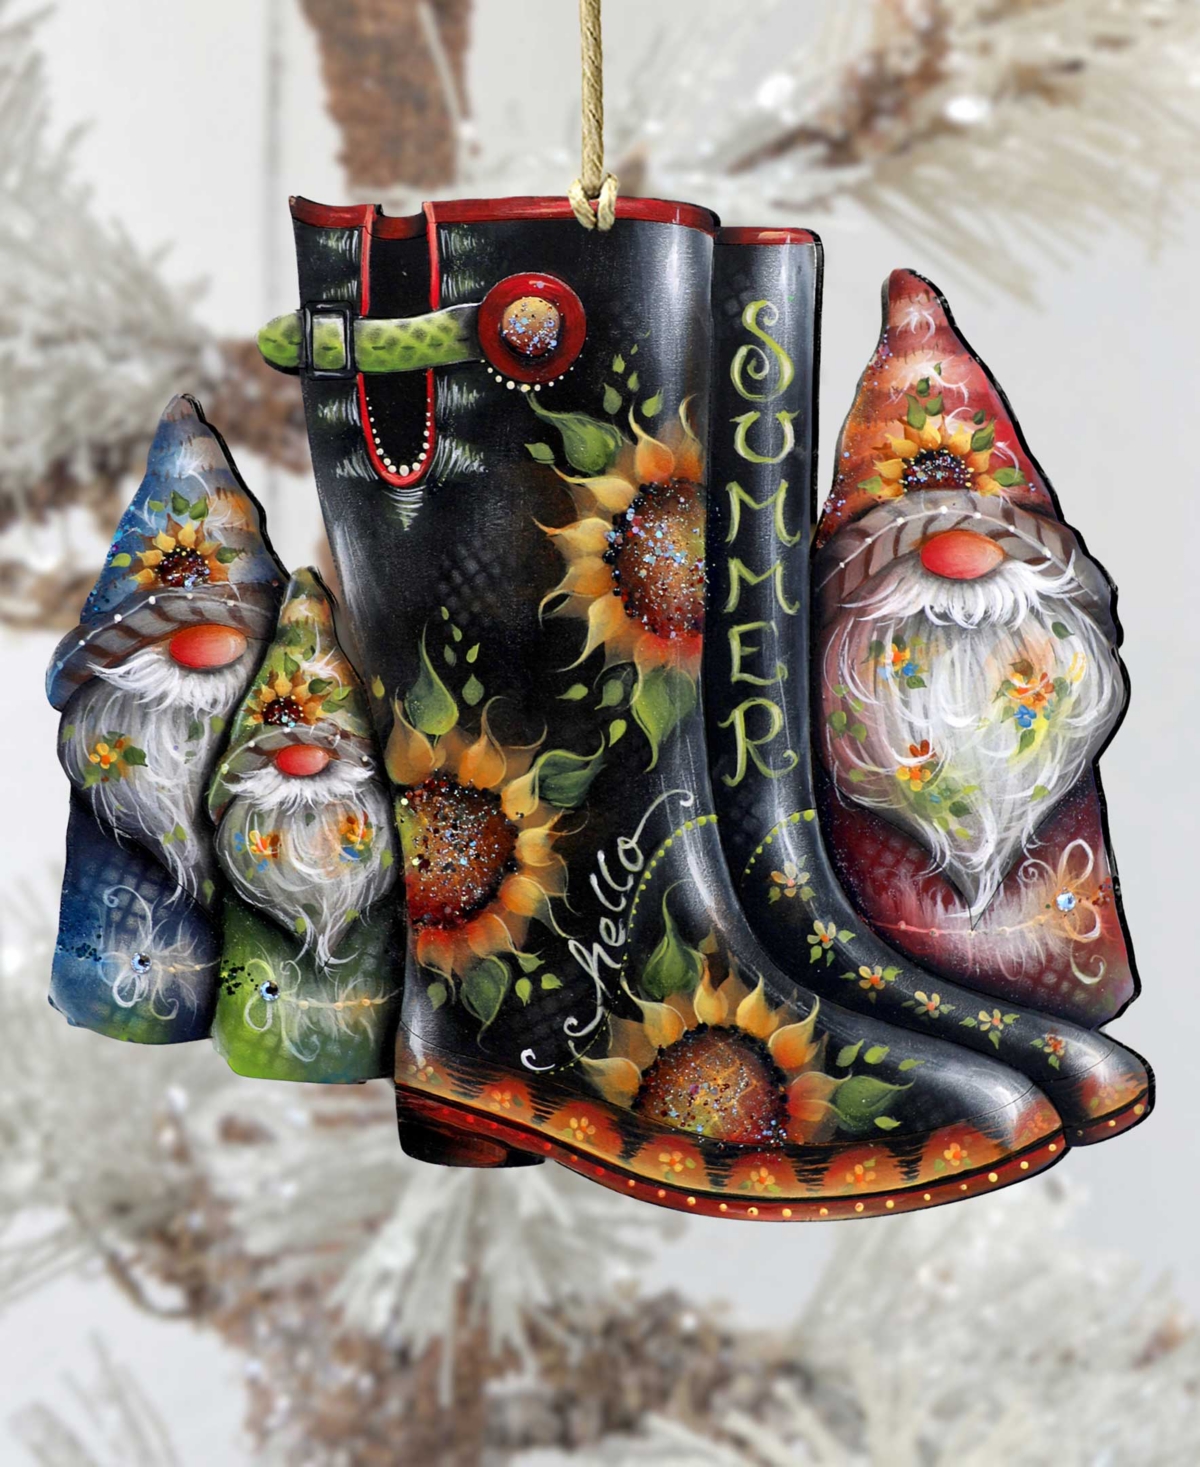 Shop Designocracy Holiday Wooden Ornaments Hello Summer Boots Home Decor J. Mills-price In Multi Color